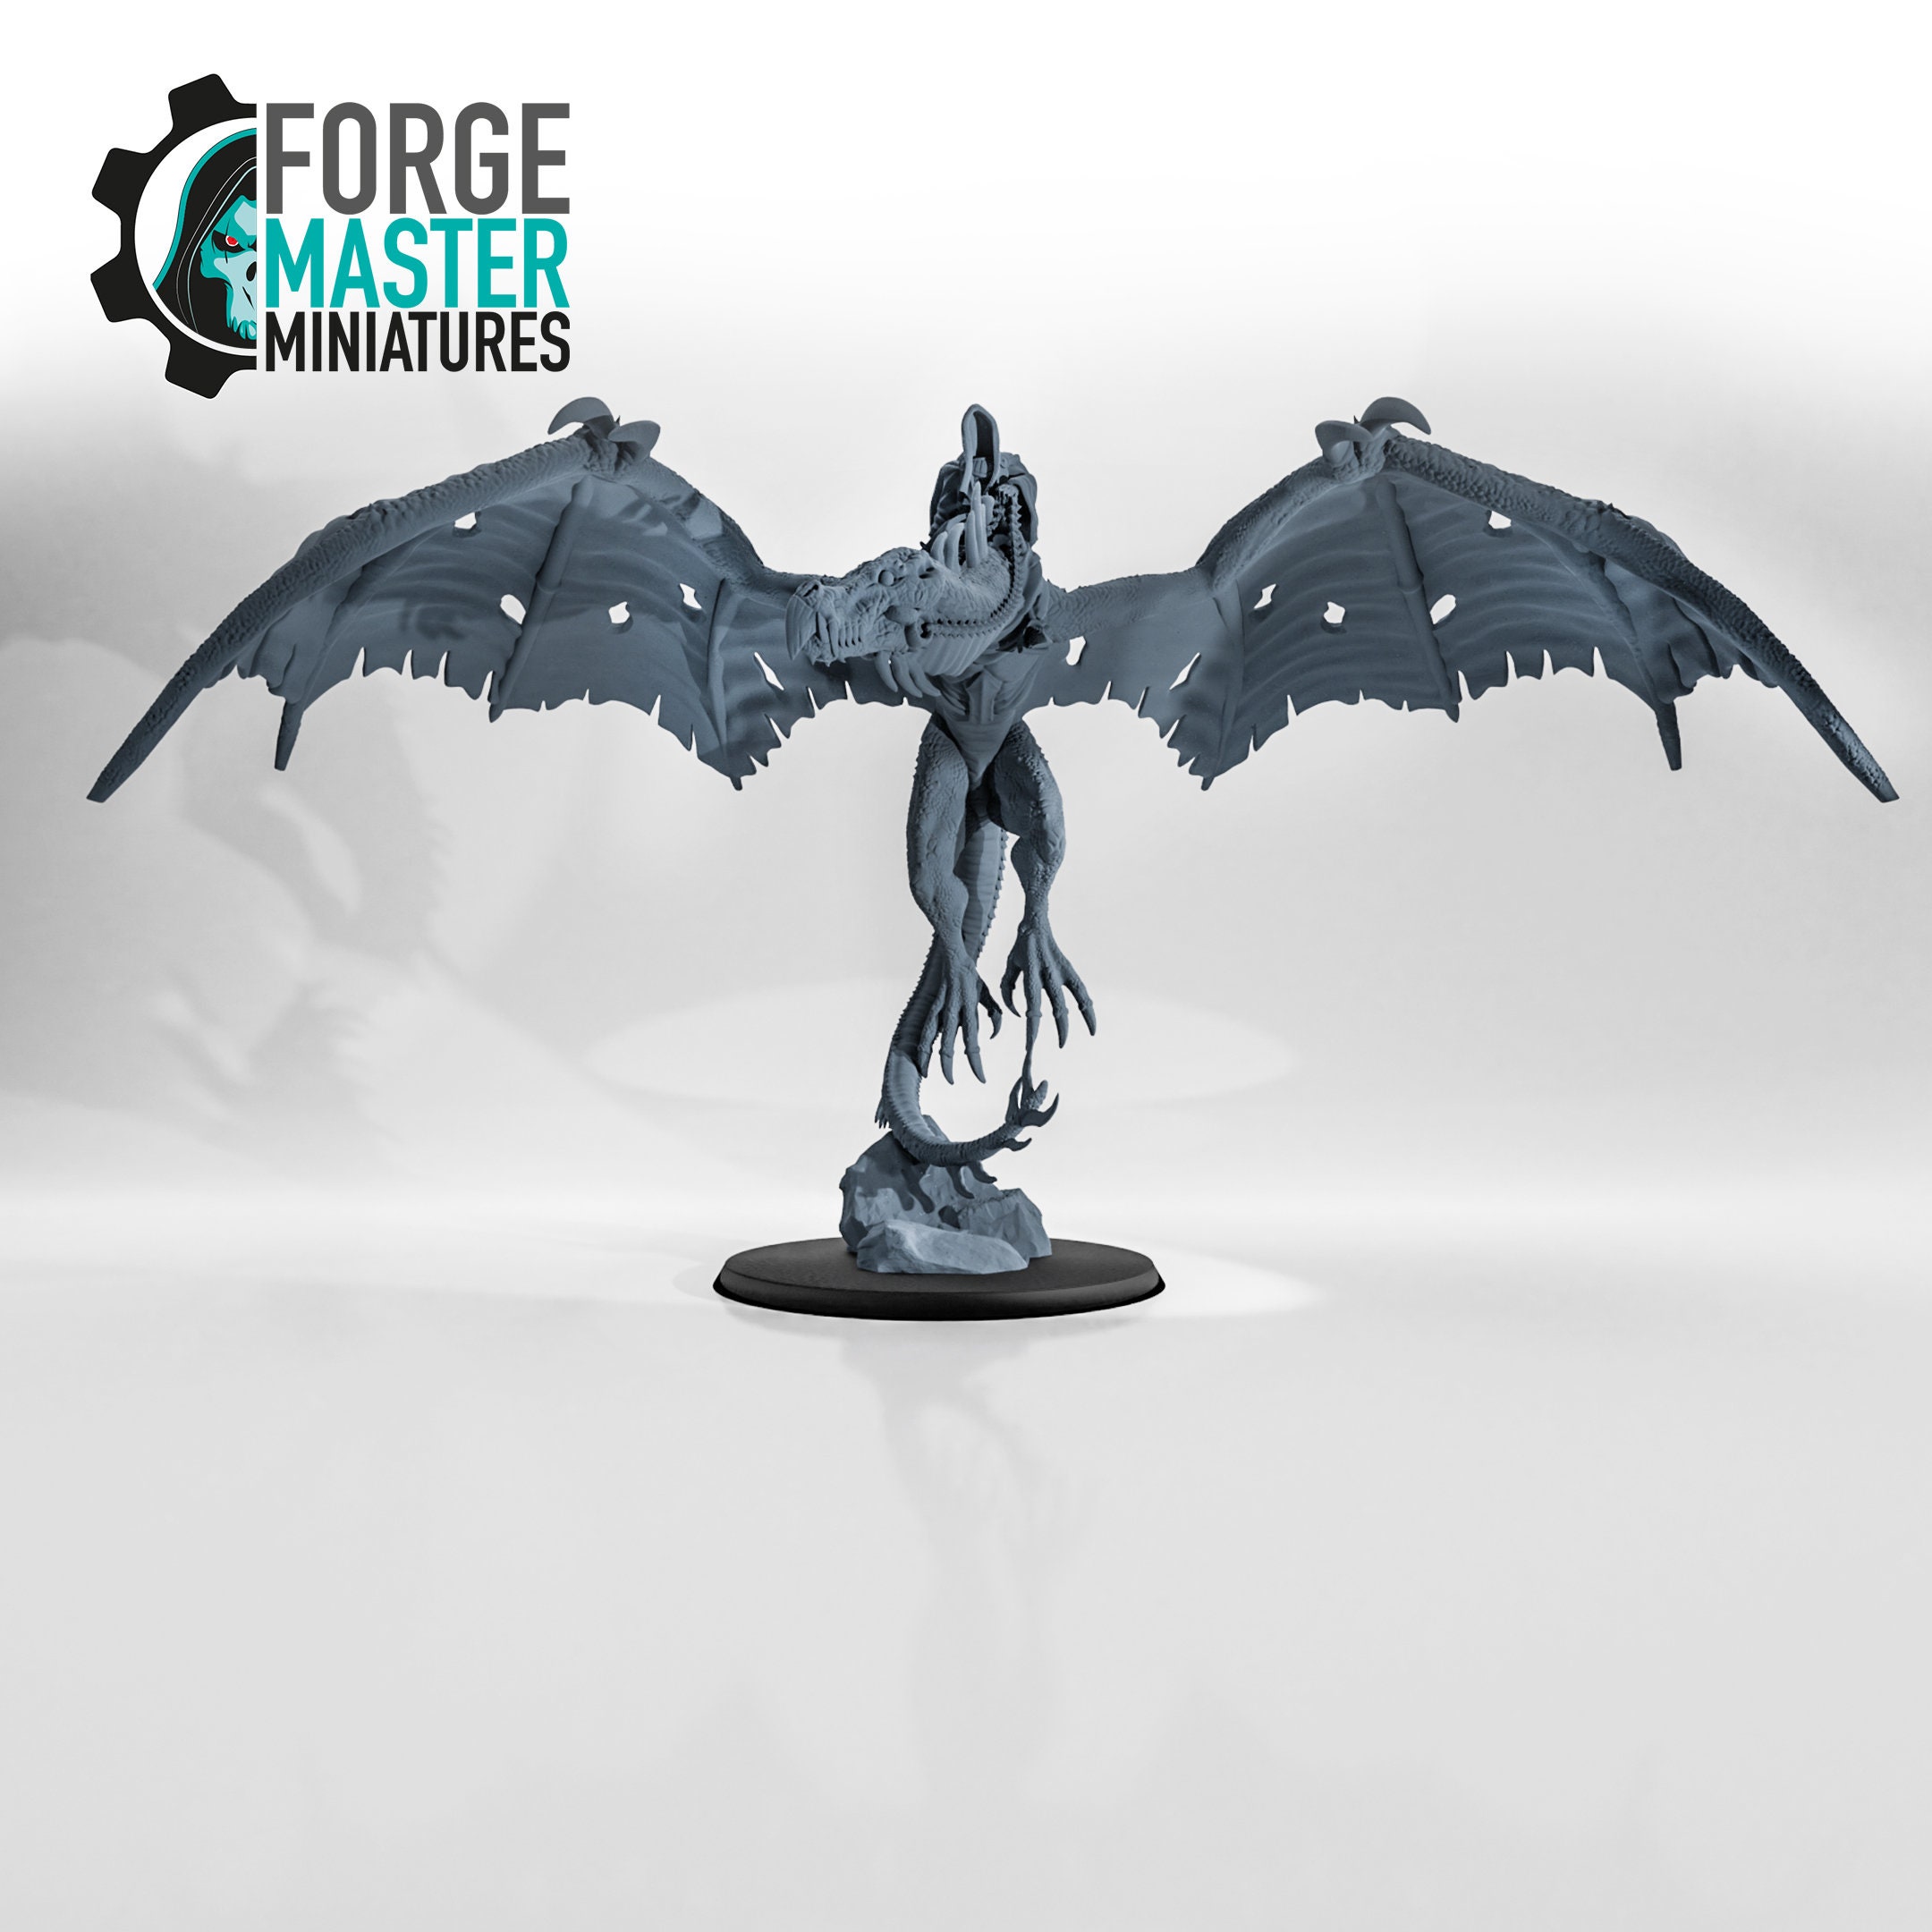 Eastern Lord Wraith on Winged Shadow wargaming miniatures by Kzk Minis 3D Printed by Forgemaster Miniatures